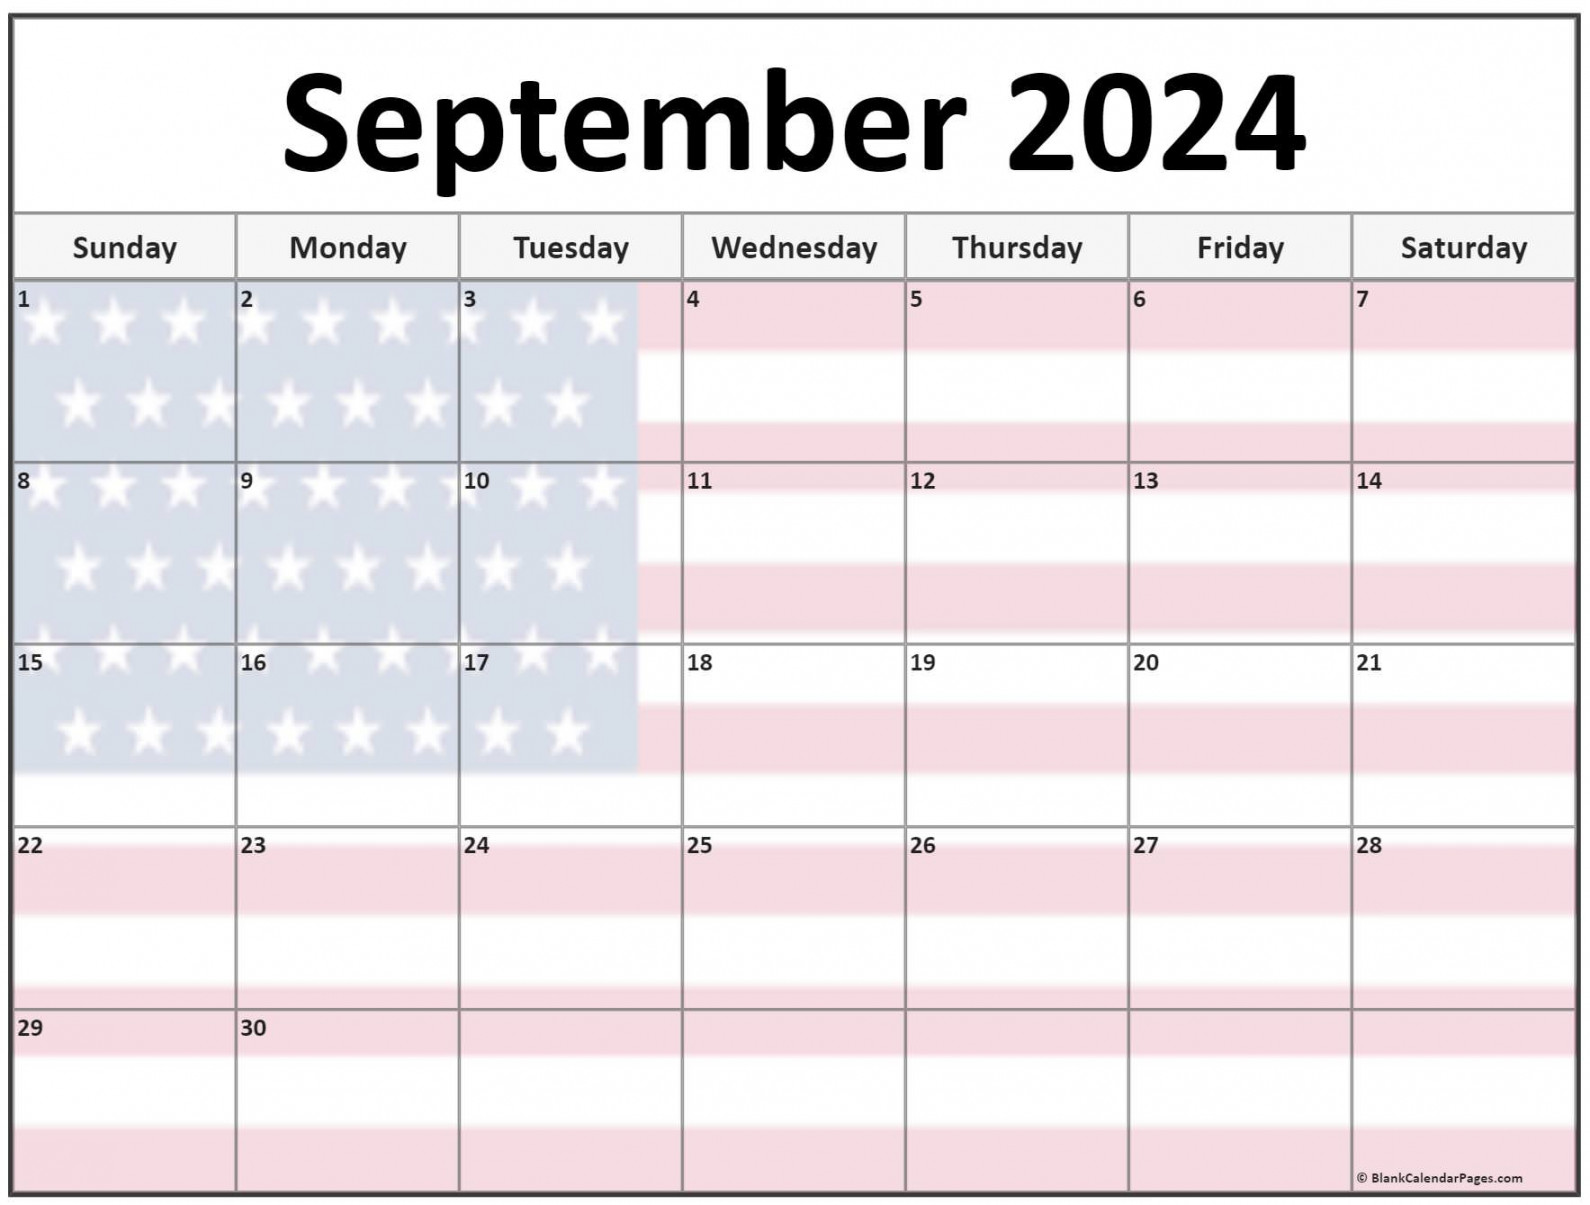 Collection of September  photo calendars with image filters.